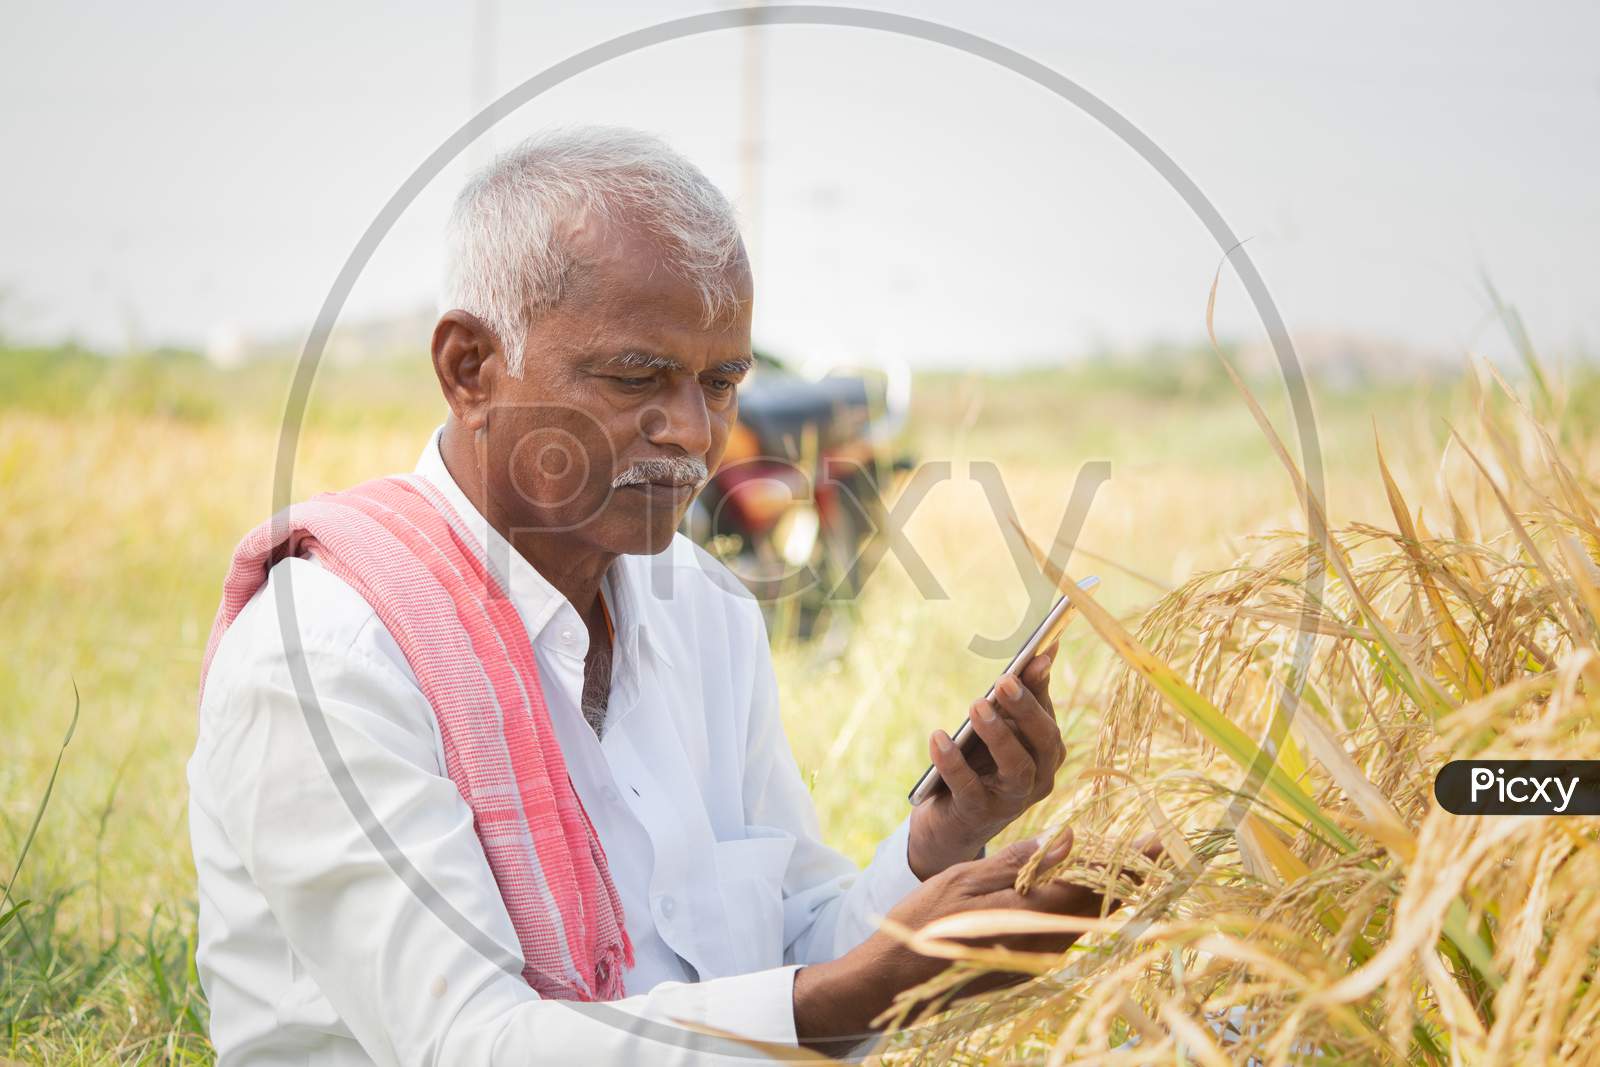 Farmer Busy Checking The Crop Yield And Pests By Using Mobile Phone - Concept Of Farmer Using Smartphone Technology And Internet In Agriculture Farmland.